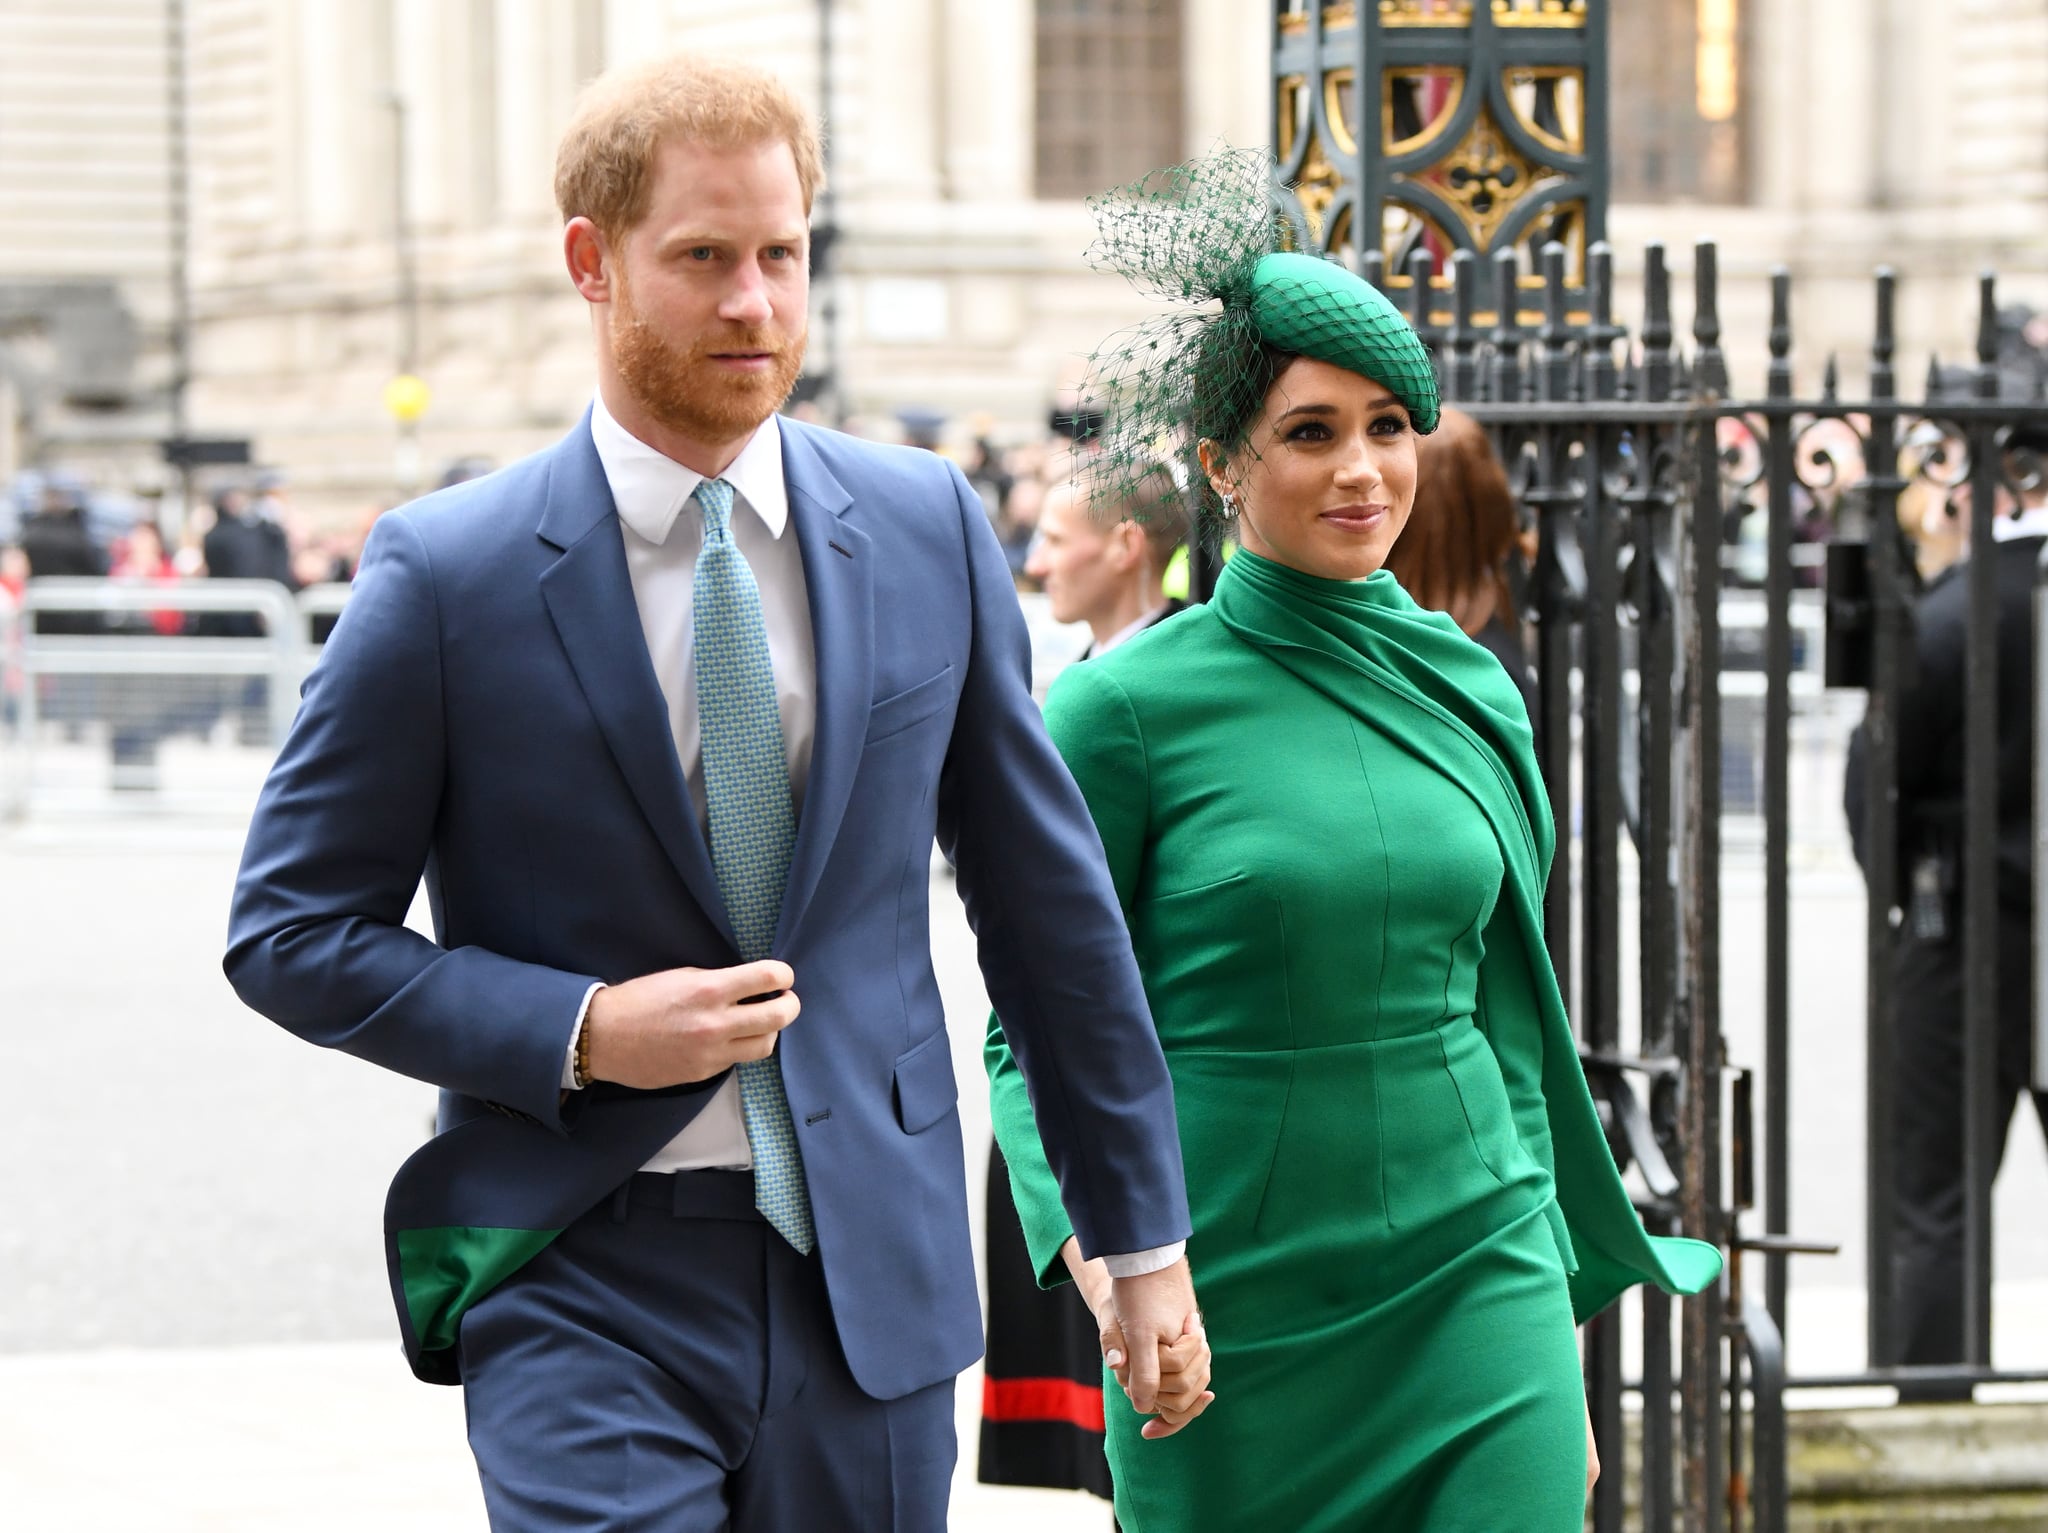 LONDON, ENGLAND - MARCH 09: Prince Harry, Duke of Sussex and Meghan, Duchess of Sussex attend the Commonwealth Day Service 2020 at Westminster Abbey on March 09, 2020 in London, England. (Photo by Karwai Tang/WireImage)